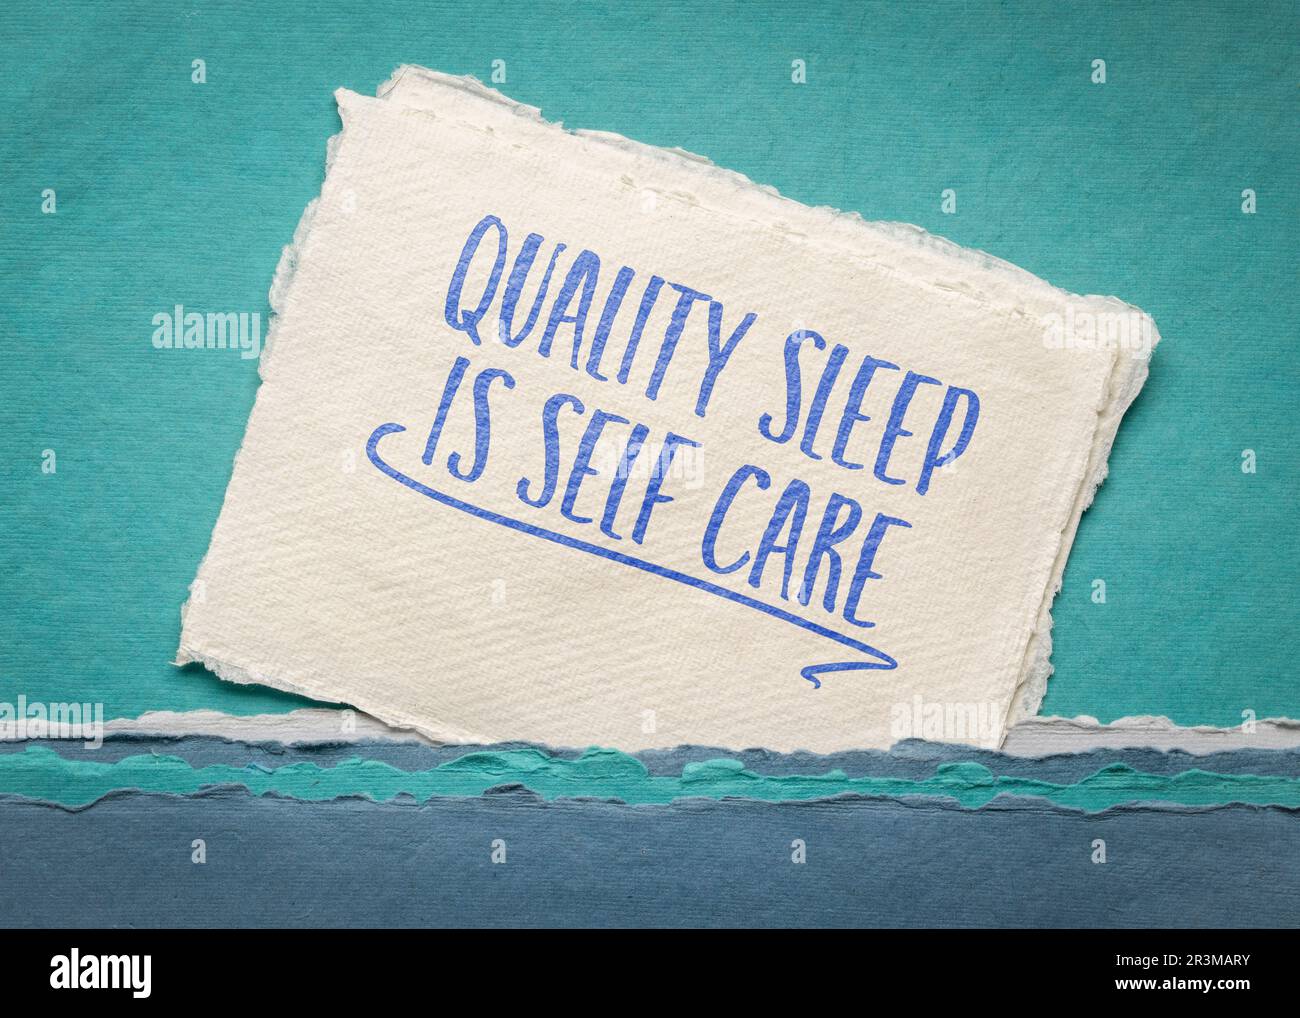 quality sleep is self care - inspirational reminder note on an art paper, healthy lifestyle concept Stock Photo